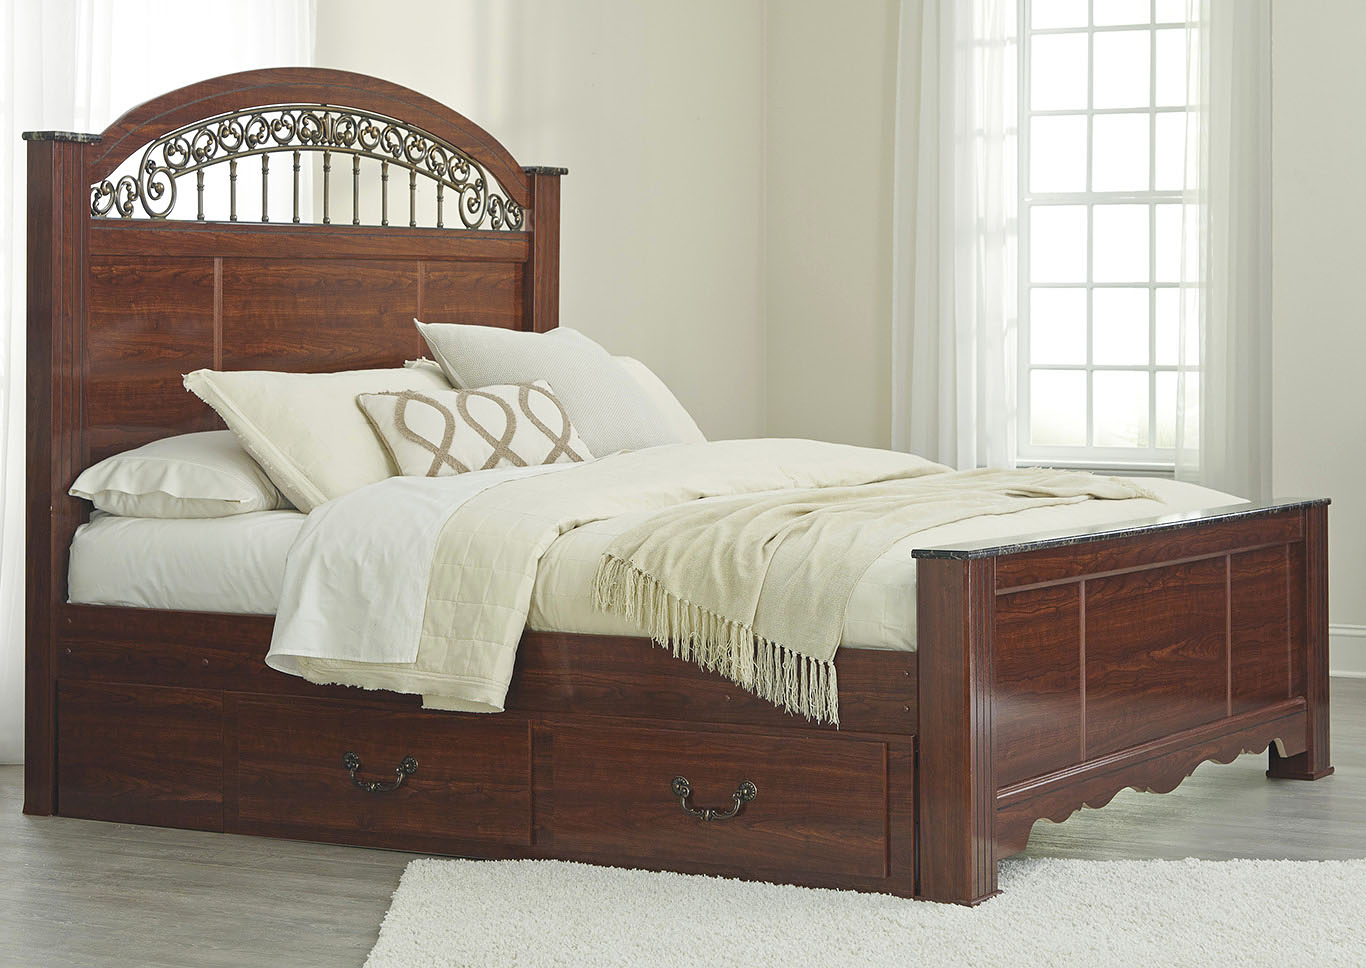 Catalog Outlet Inc Fairbrooks Estate Queen Poster Bed with regard to measurements 1366 X 968